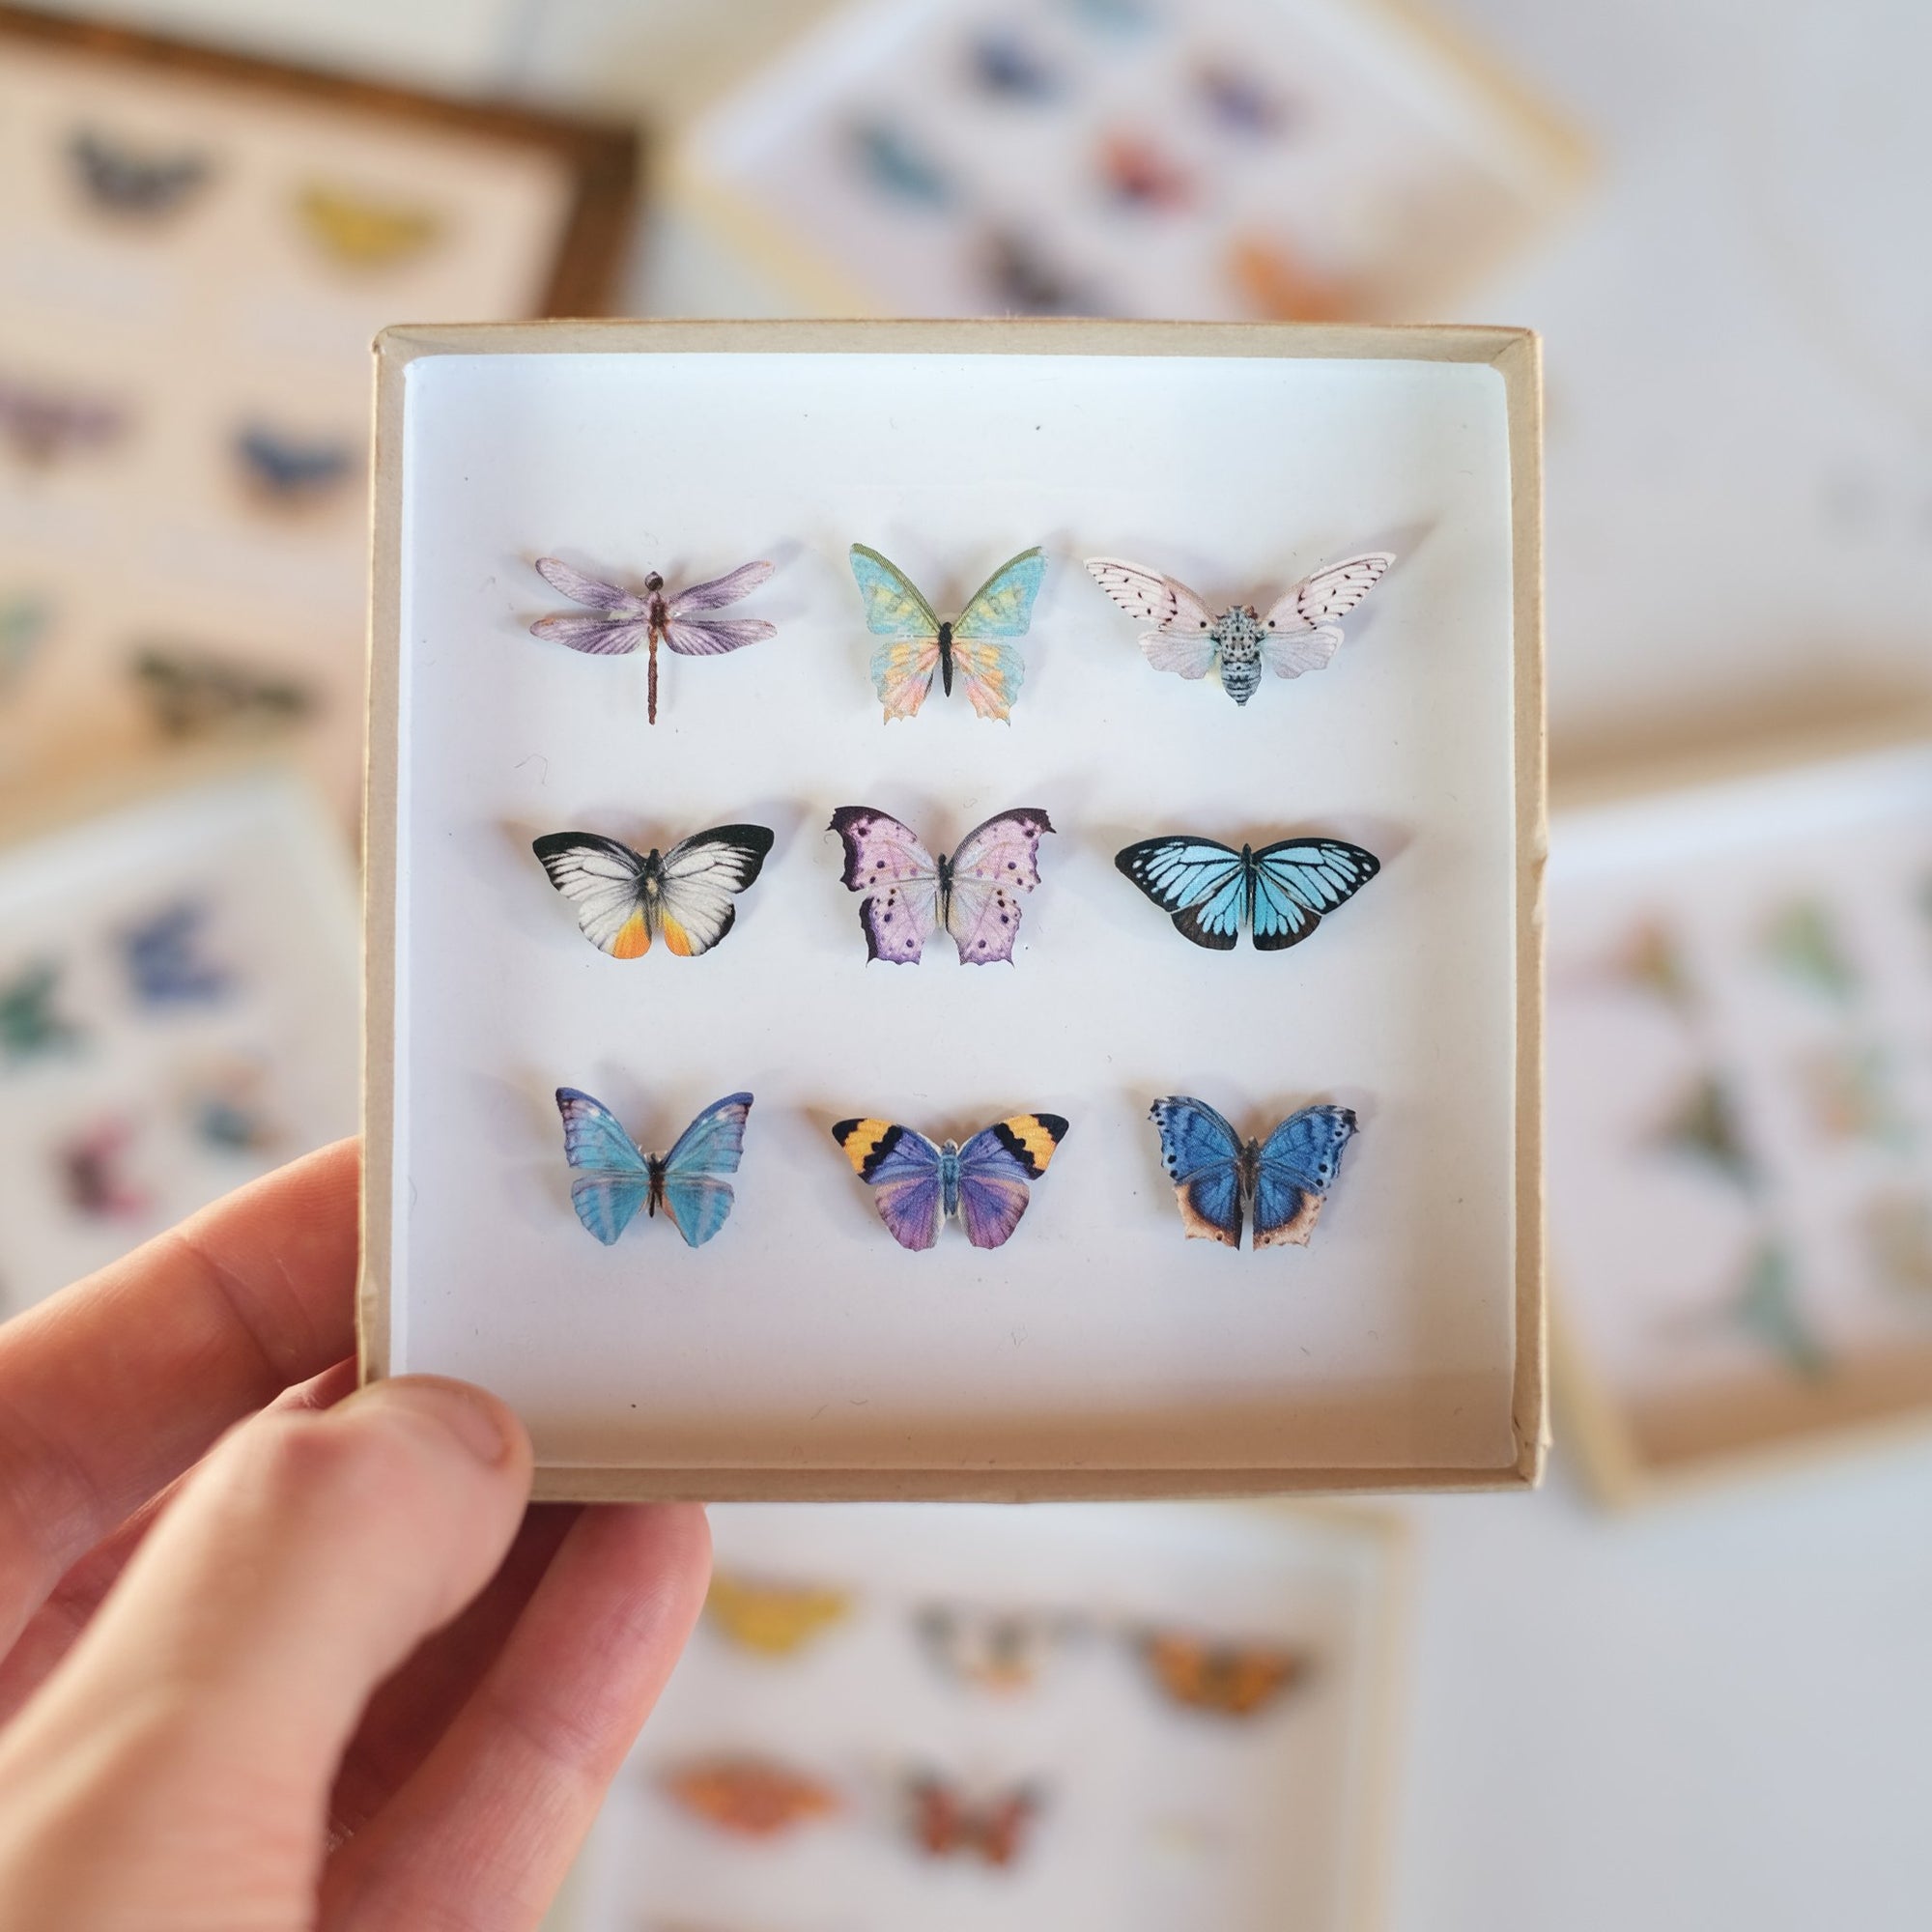 'Crocus' Micro Moth & Butterfly Collection Artist Wholesale